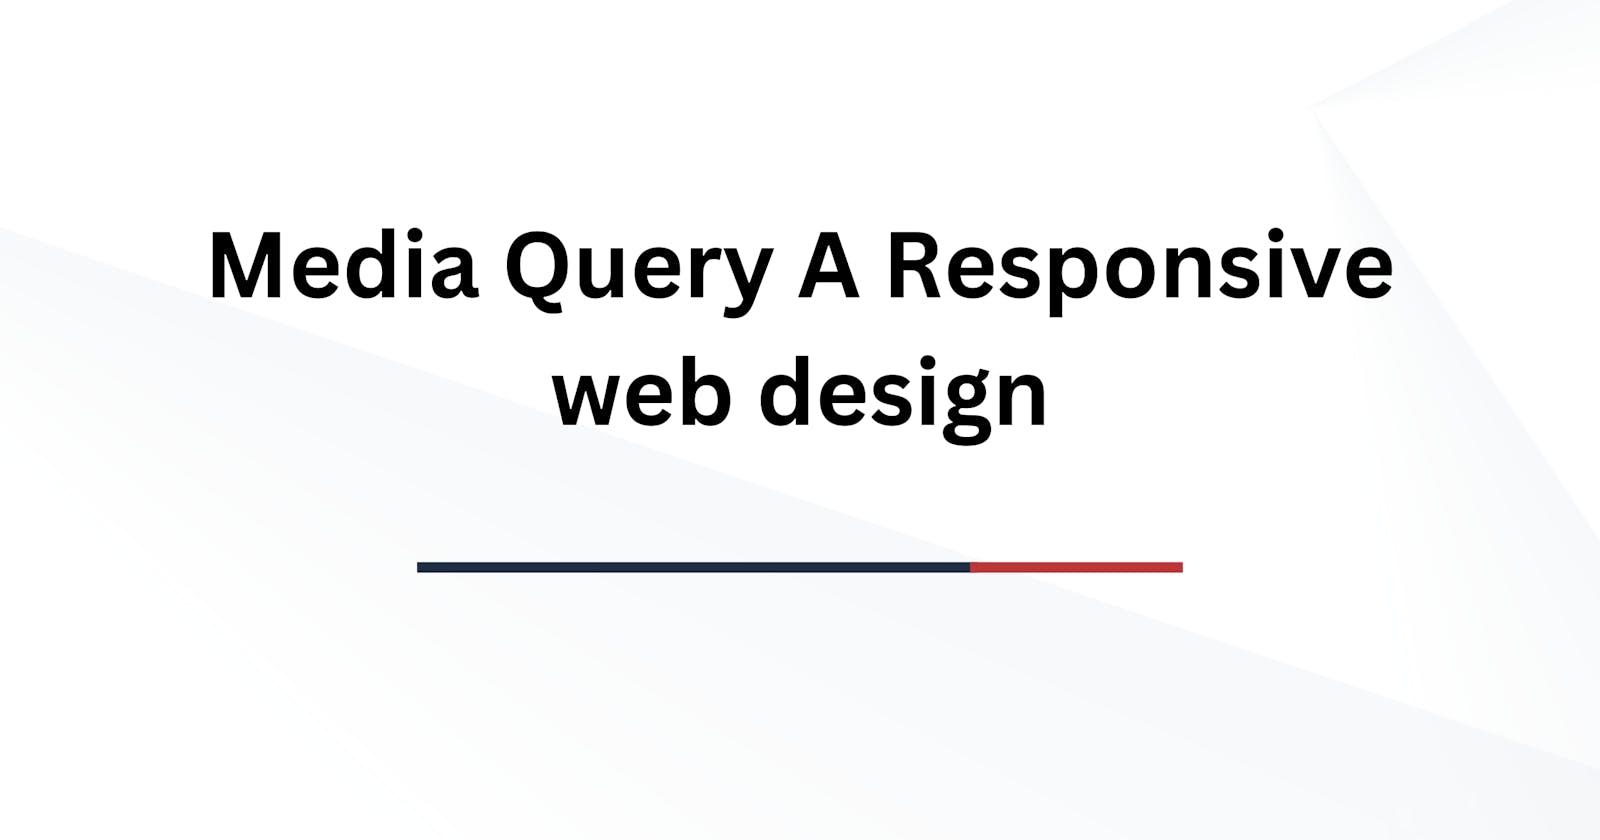 Learn: Media Query